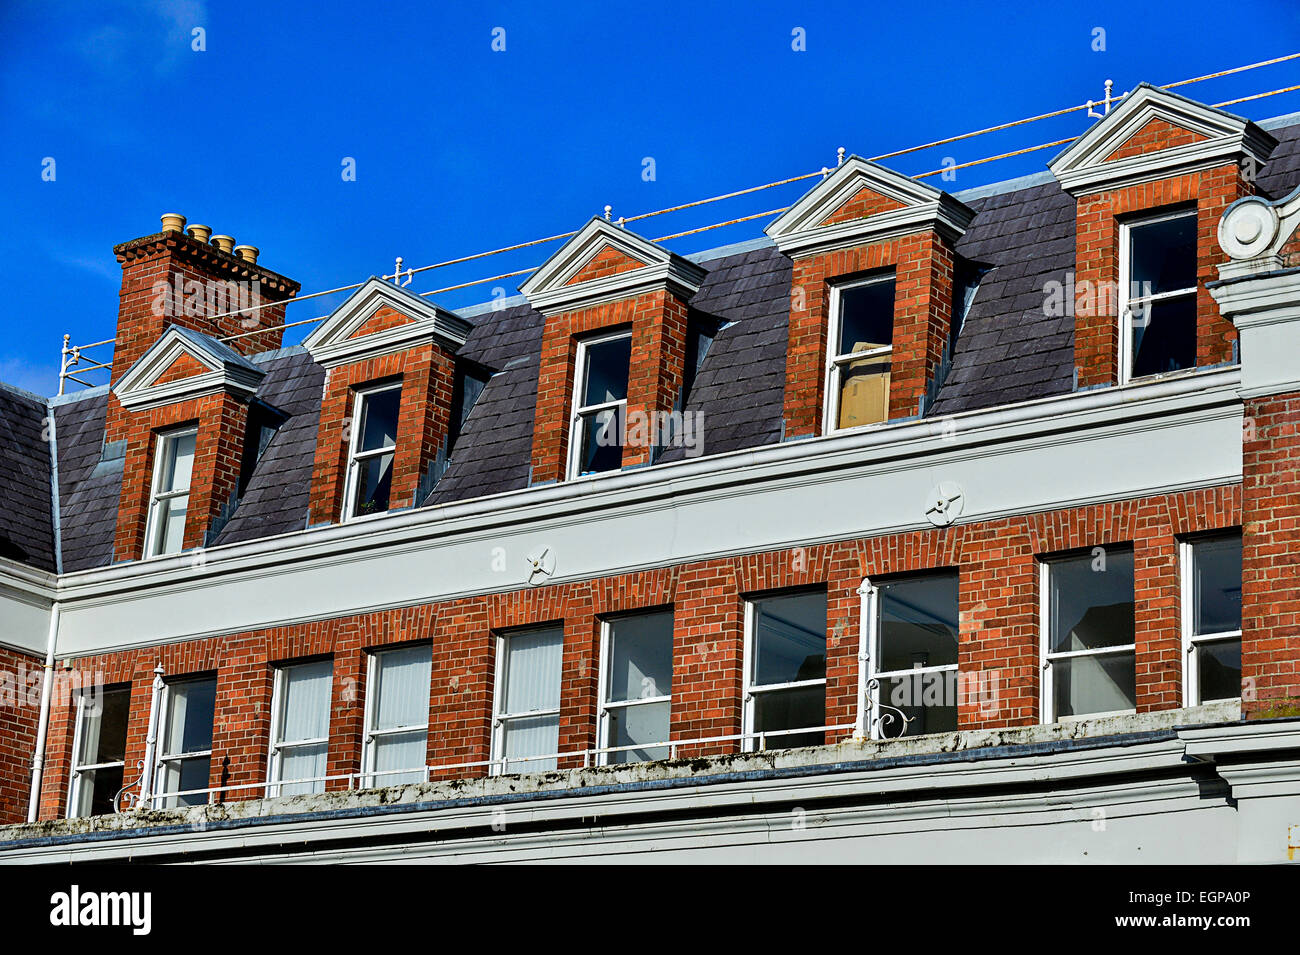 The Northern Counties Building (built 1902) in Waterloo Place, Londonderry, Northern Ireland. Photo: George Sweeney / Amamy Stock Photo